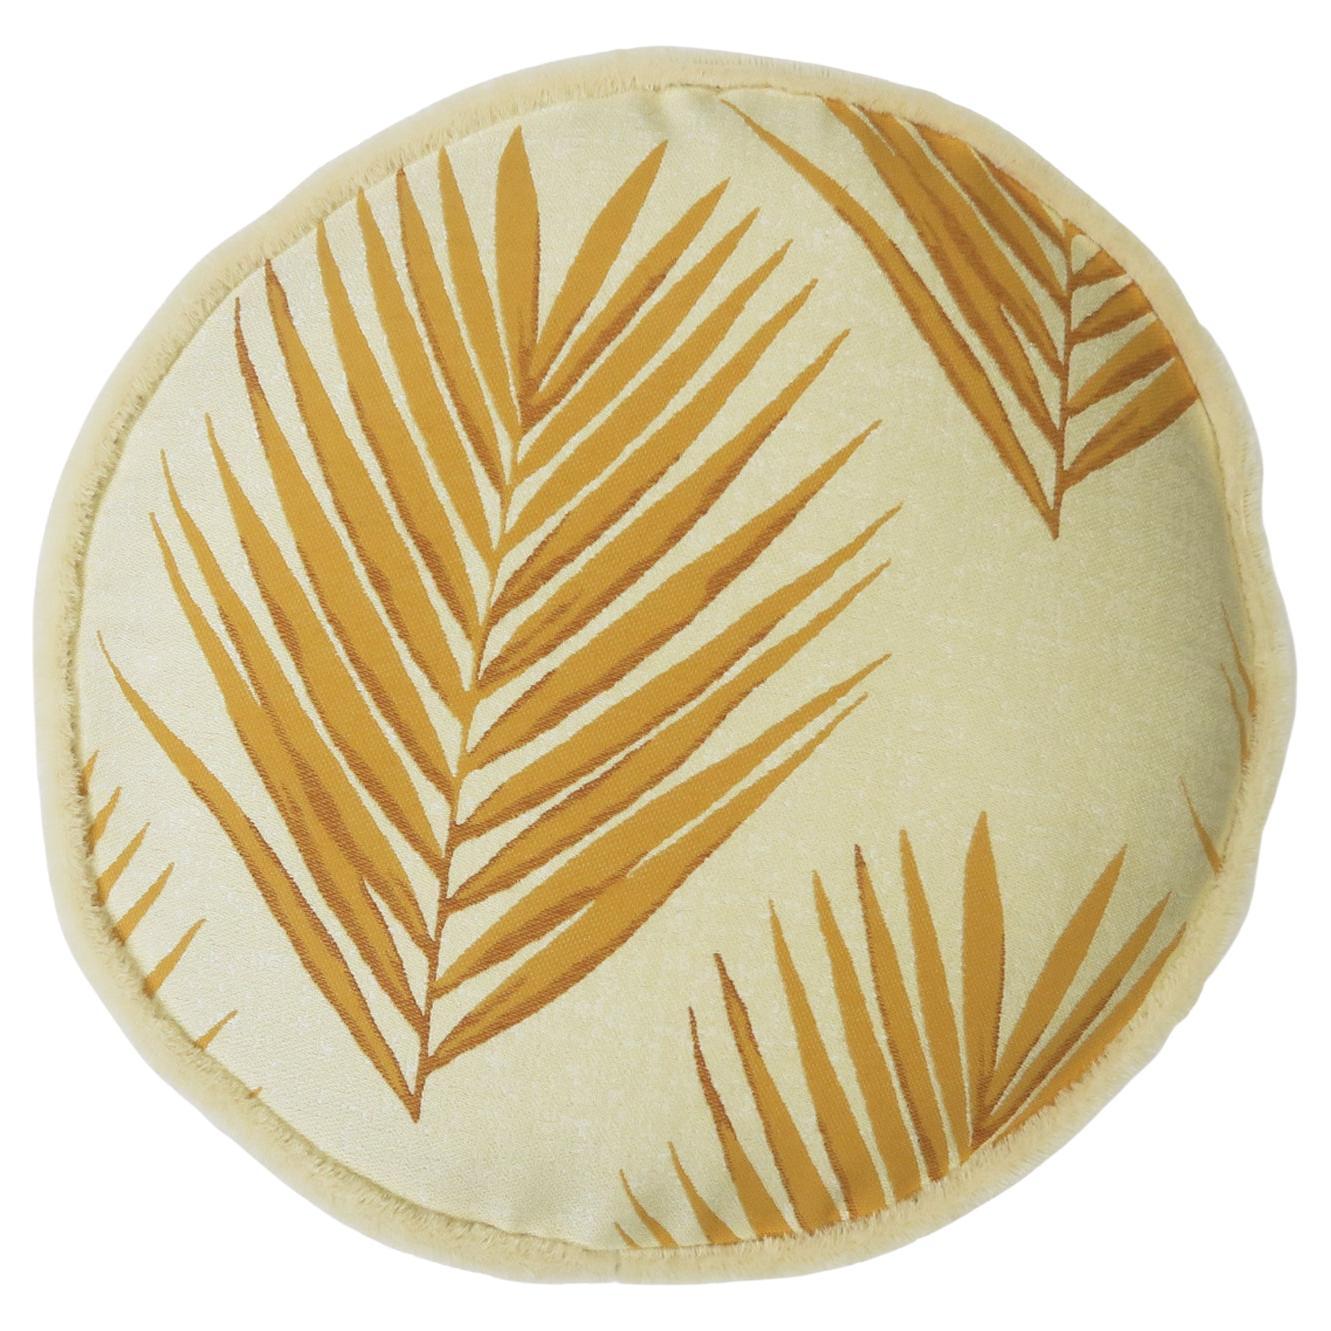 Modern Round Patterned Throw Pillow Yellow "Bamboo" by Evolution21 For Sale